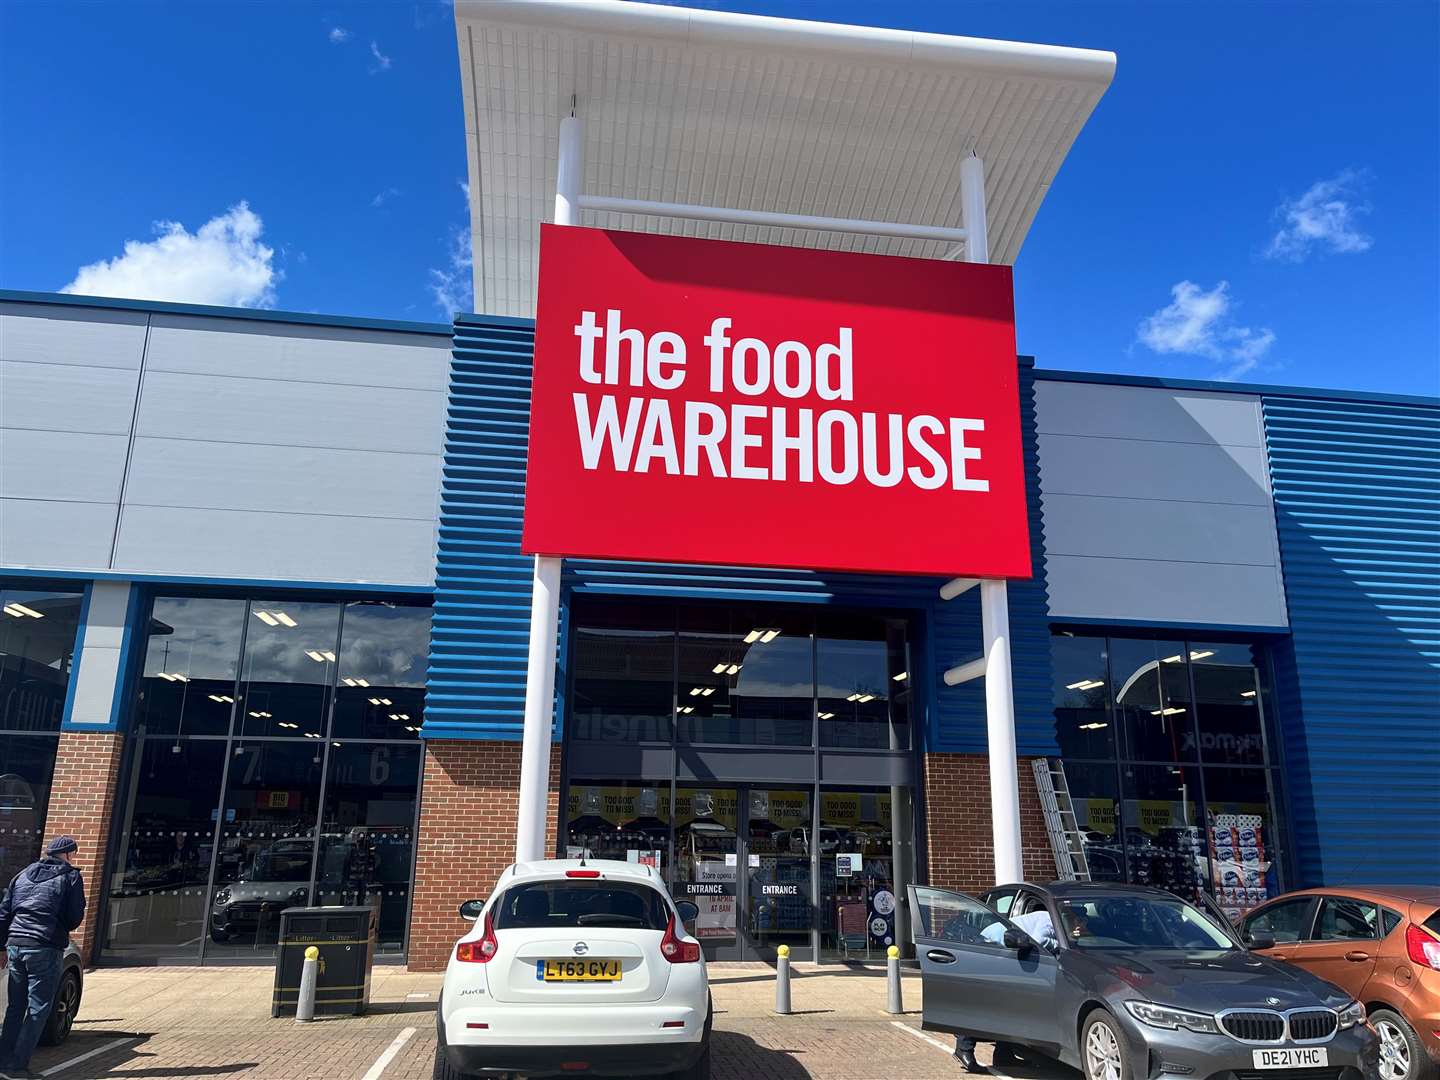 The Food Warehouse takes the spot of the former Argos store